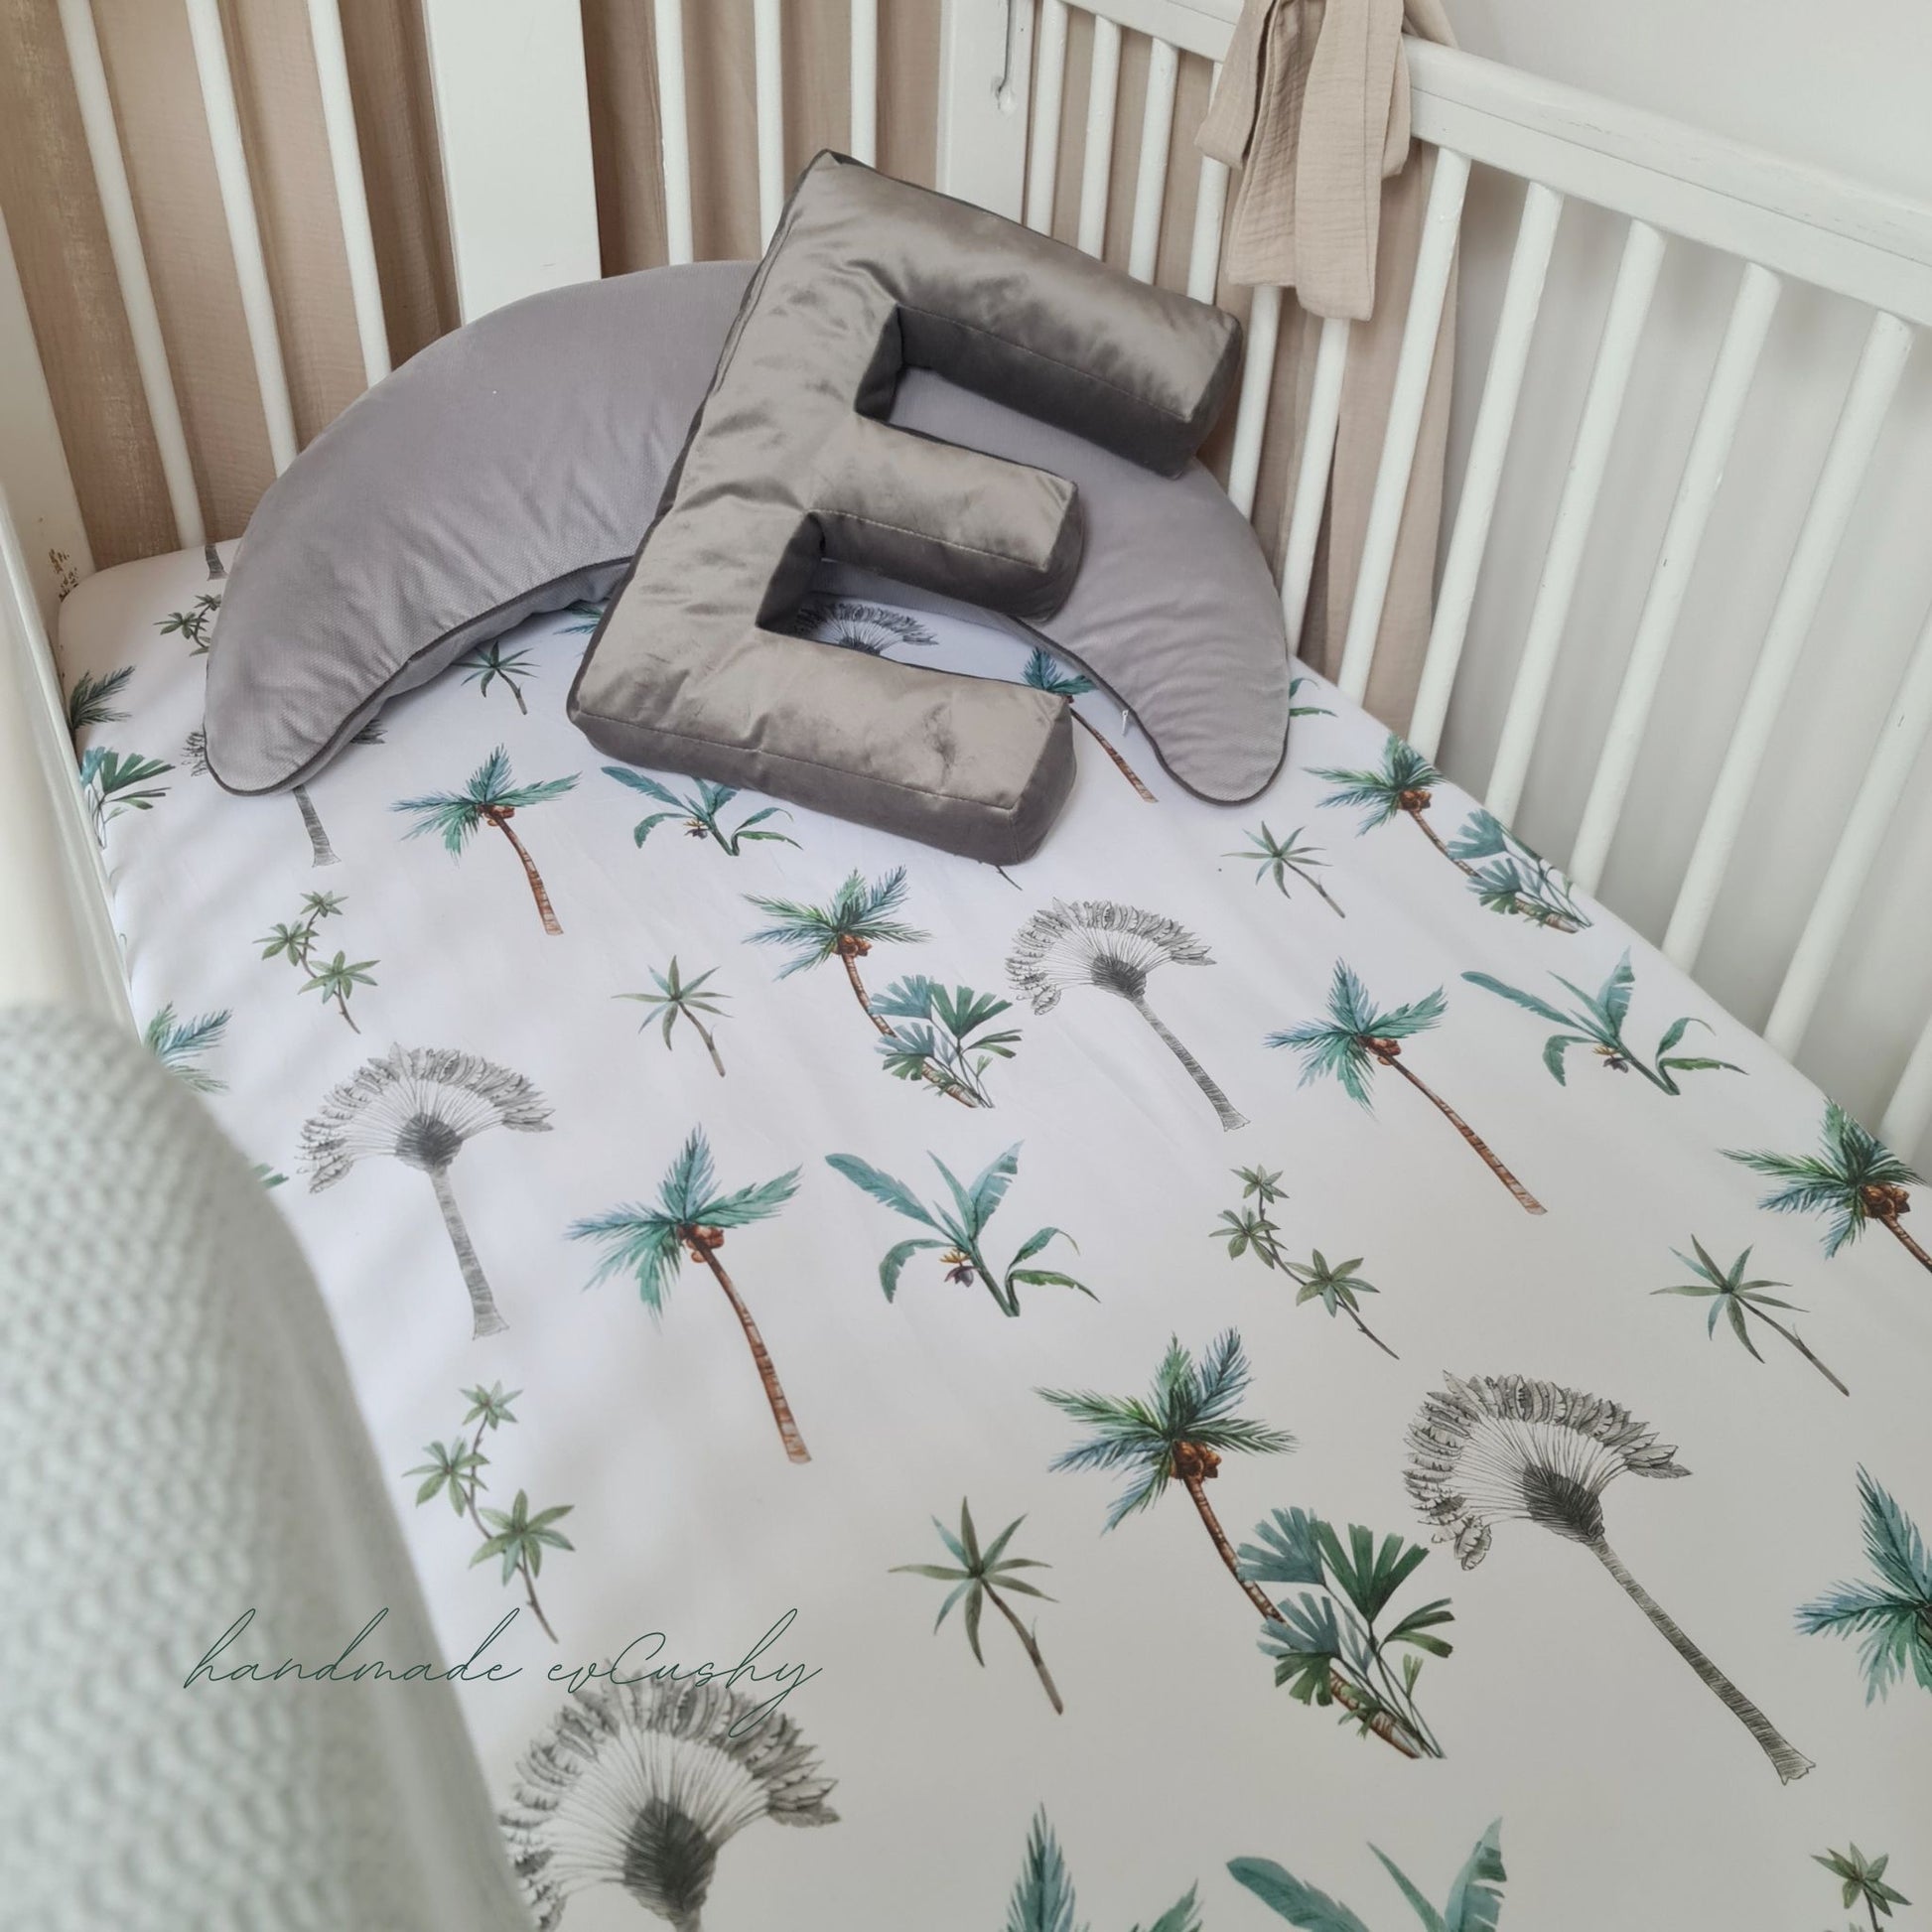 00% Cotton Fitted Cot Bed Sheet with Palm Tree Pattern, part of the Safari Dream Collection, designed for 70x140 cm mattresses